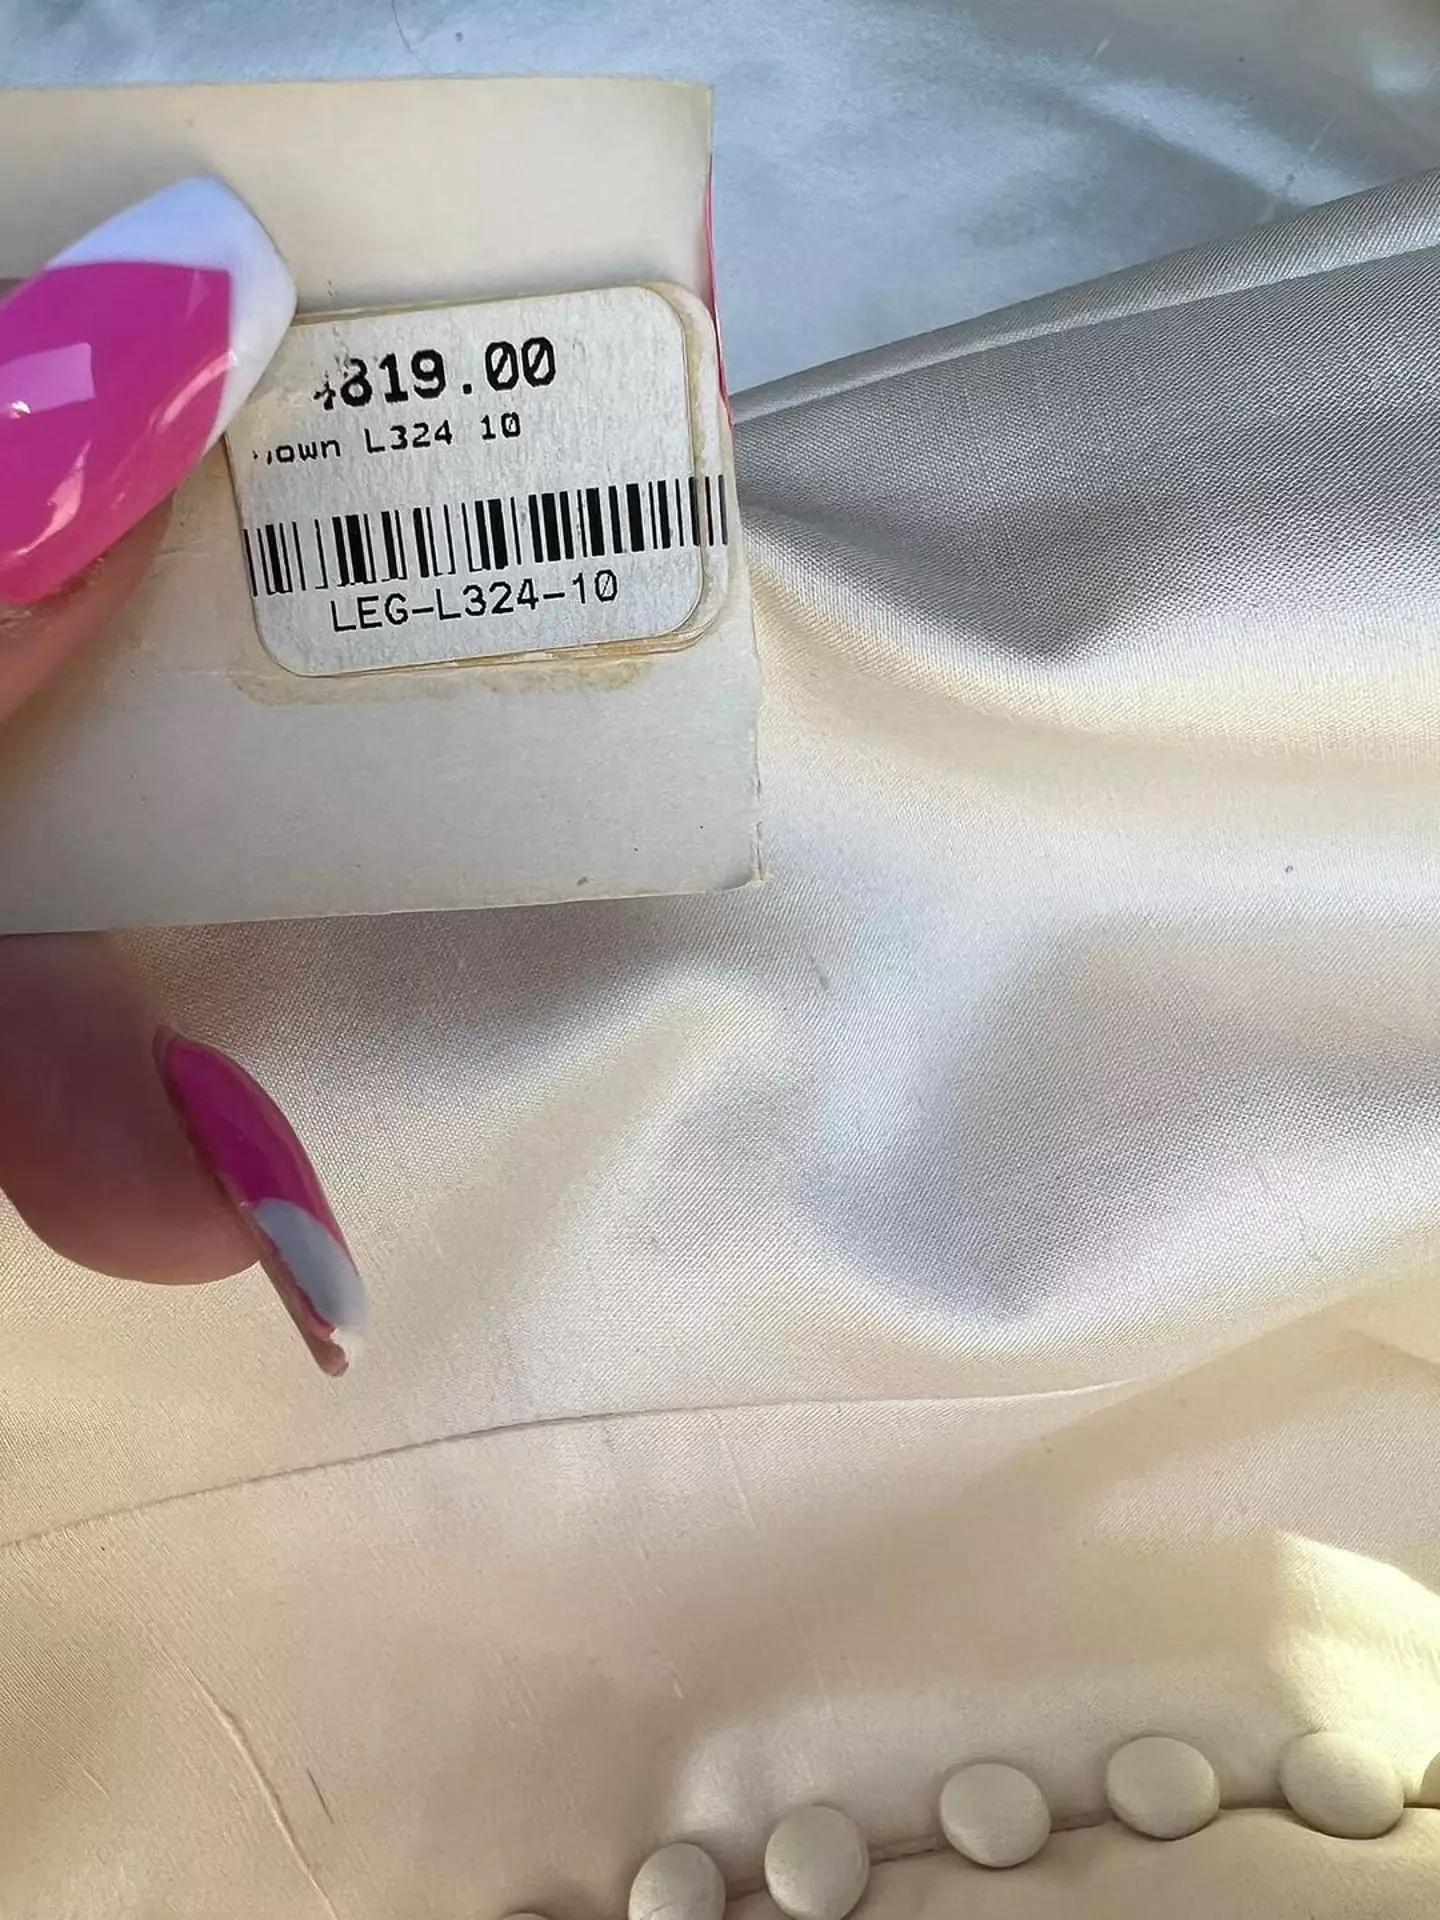 The original price tag is still attached.